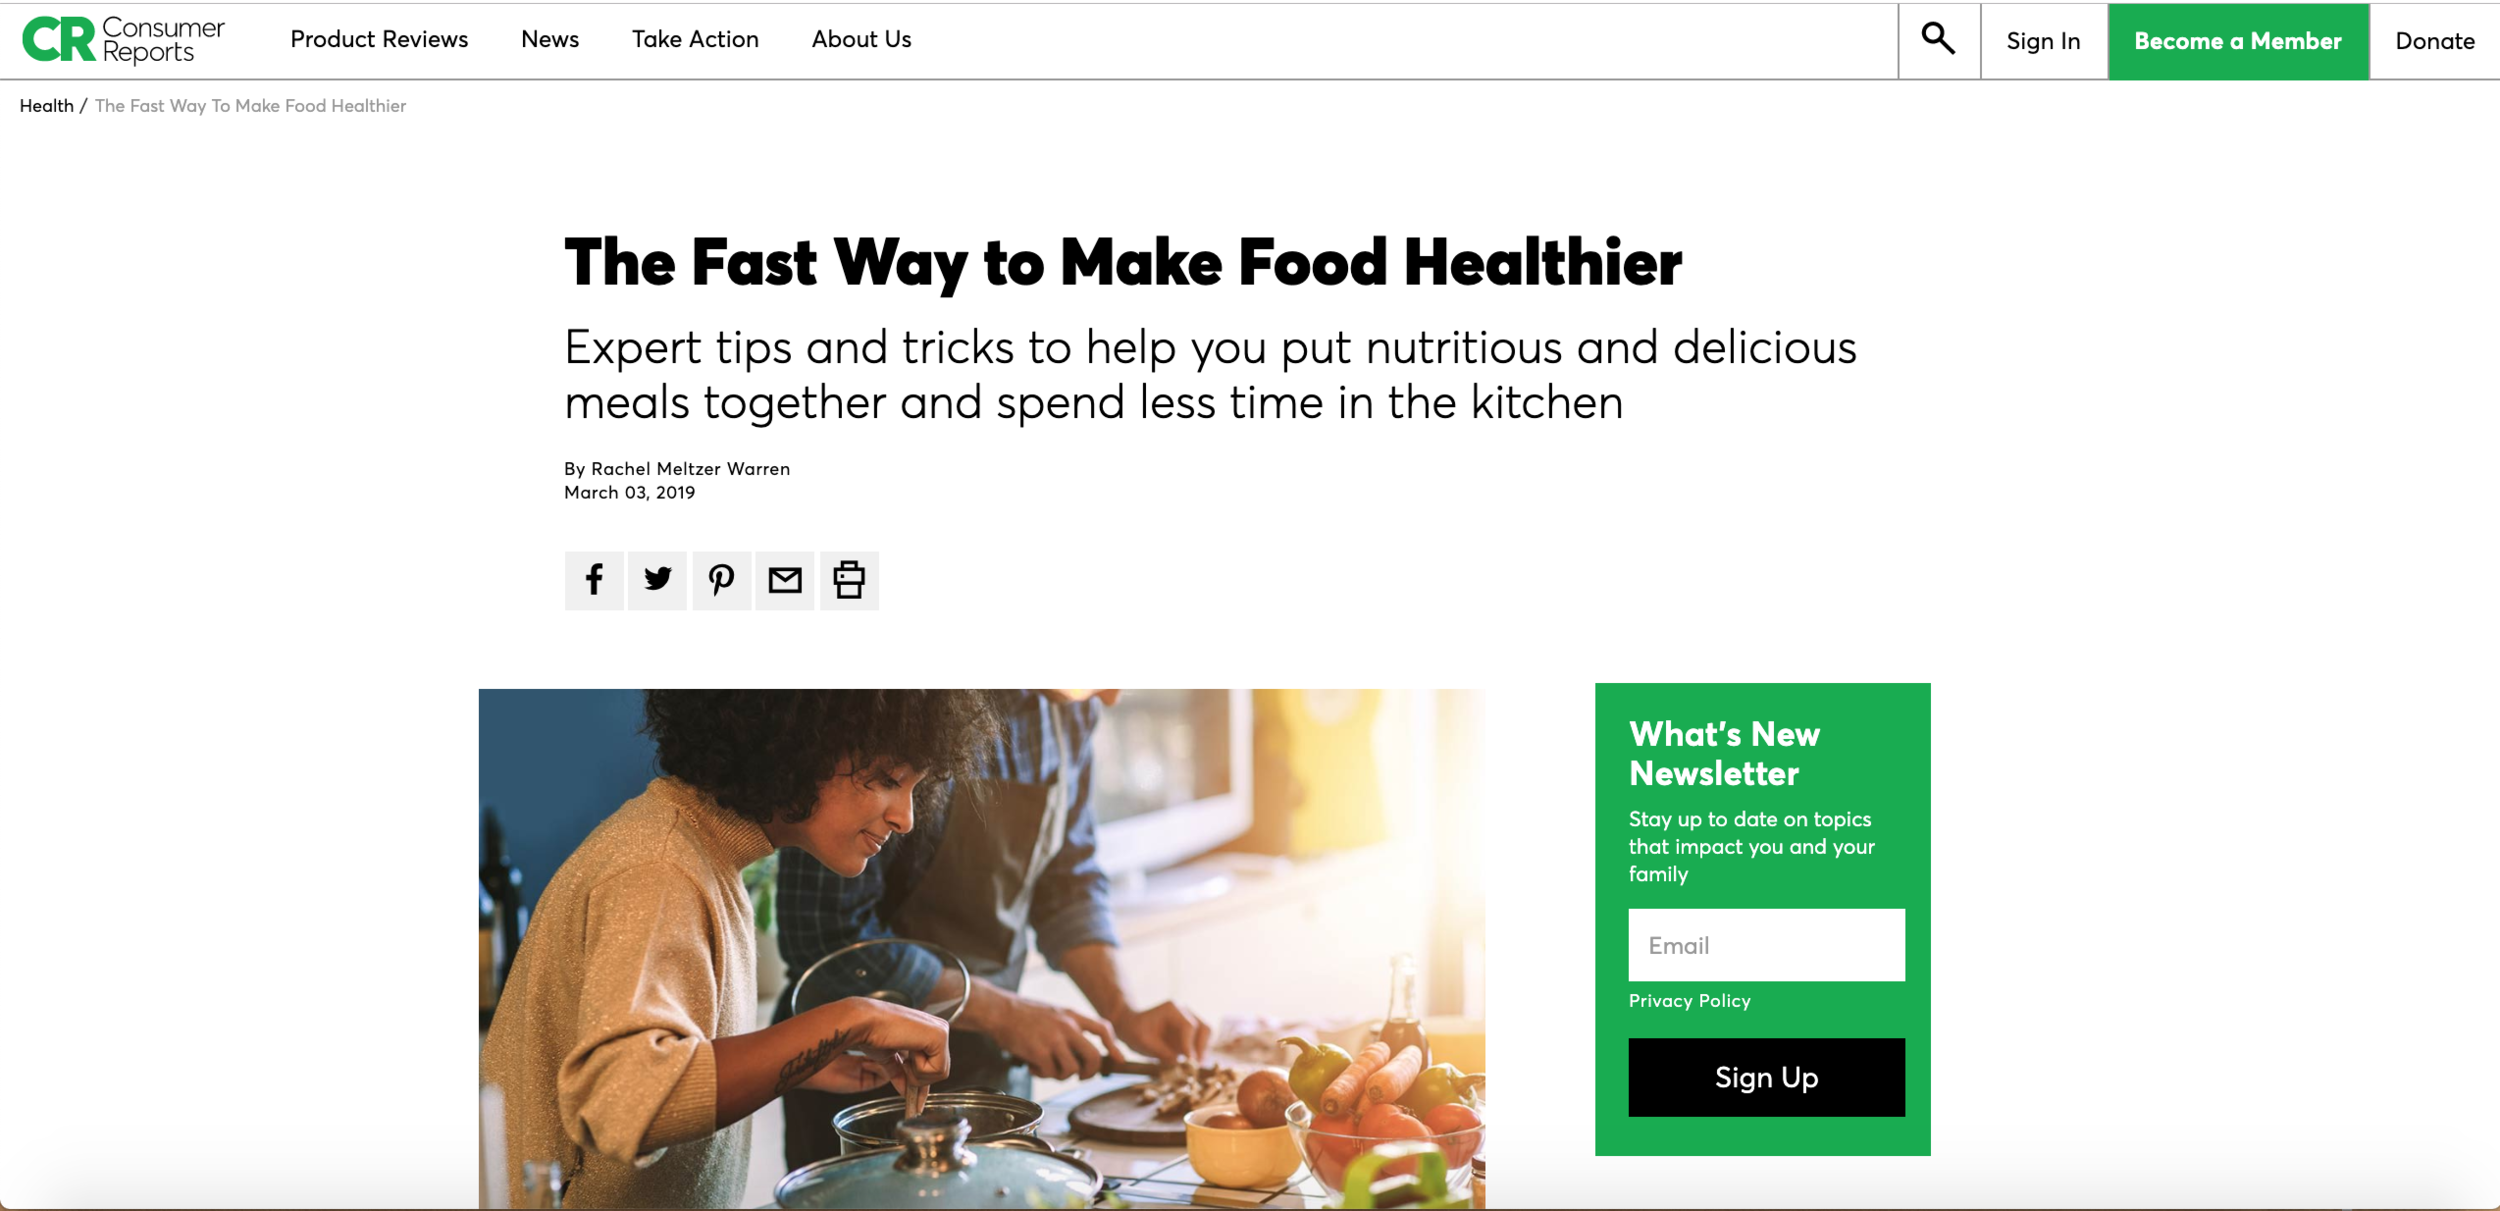 The Fast Way to Make Food Healthier